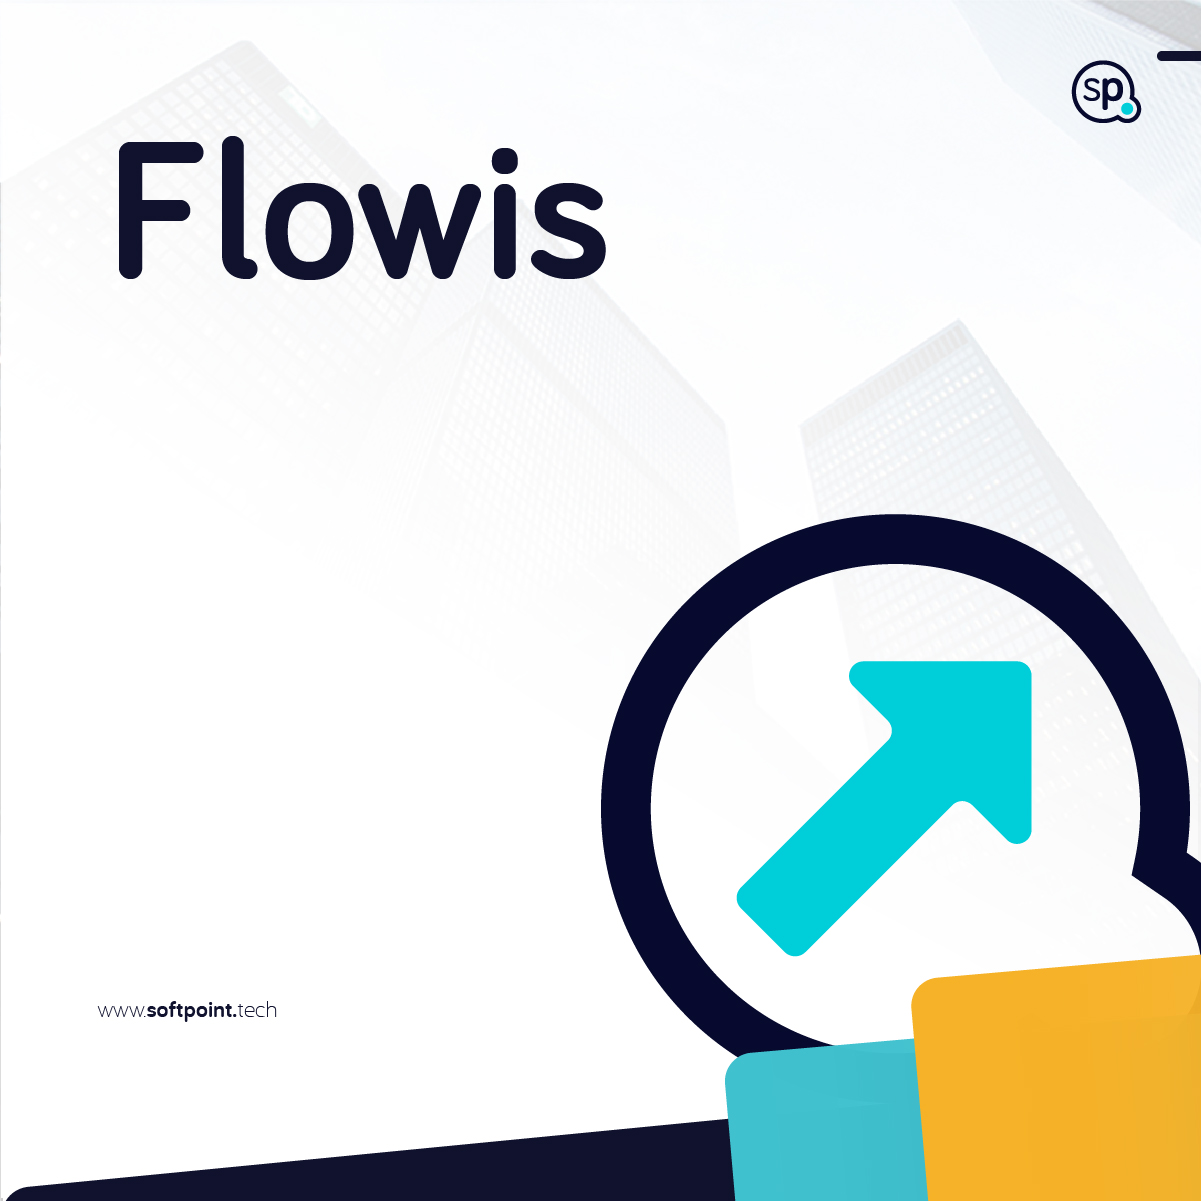 Benefits of using Flowis